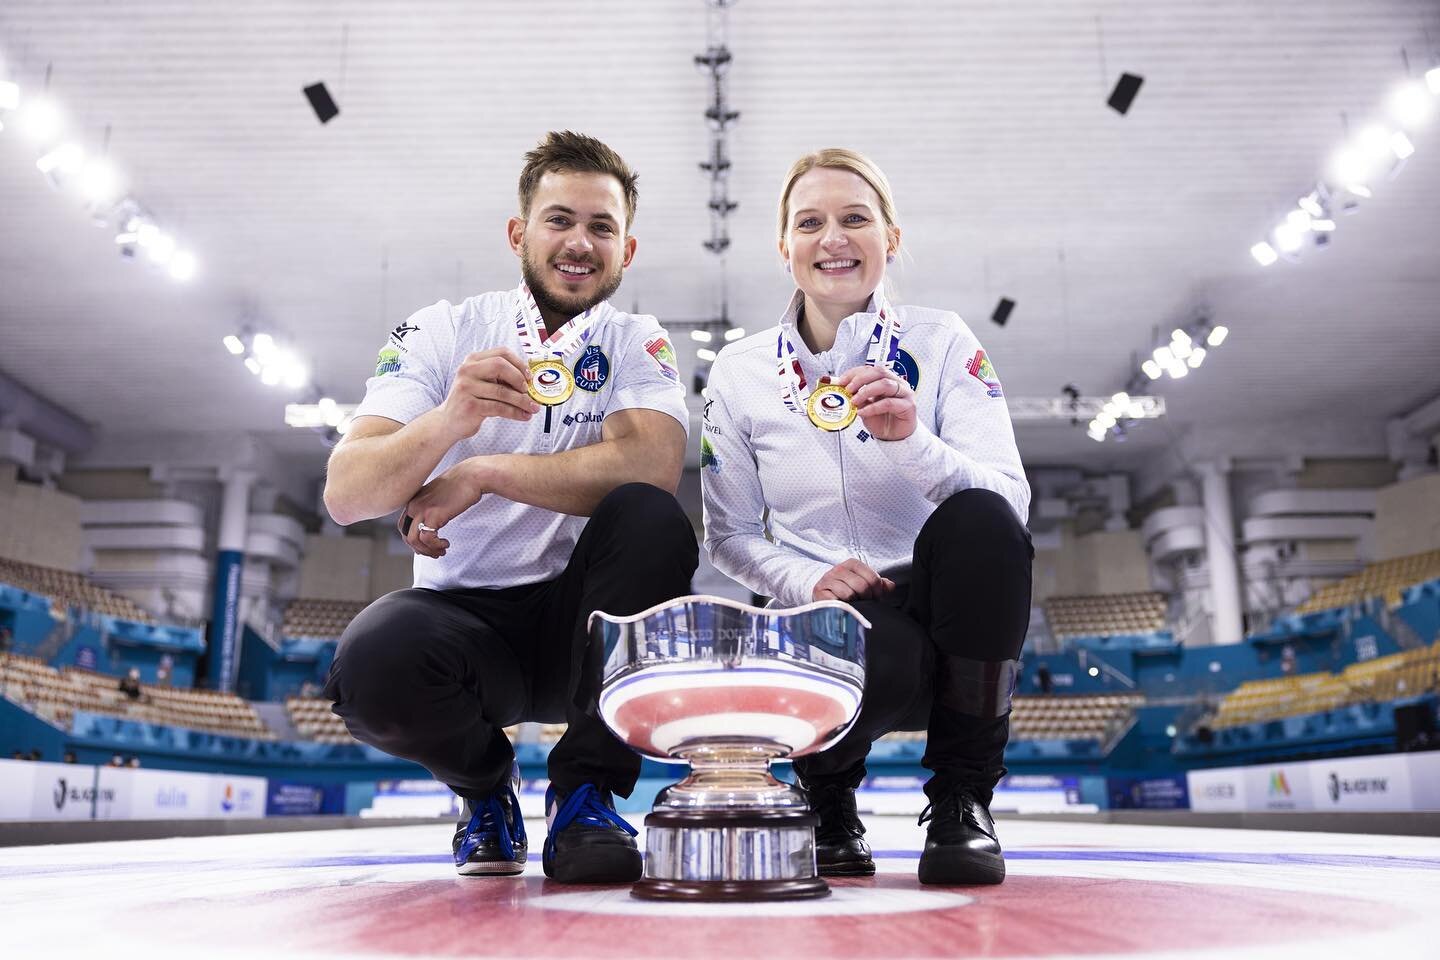 They did the damn thing!🥇

Congrats to our very own @koreydropkin and his teammate @corychristensen7 on taking home the World Mixed Doubles Championship! Couldn't be more proud of you guys!

#YoungBucks 🦌